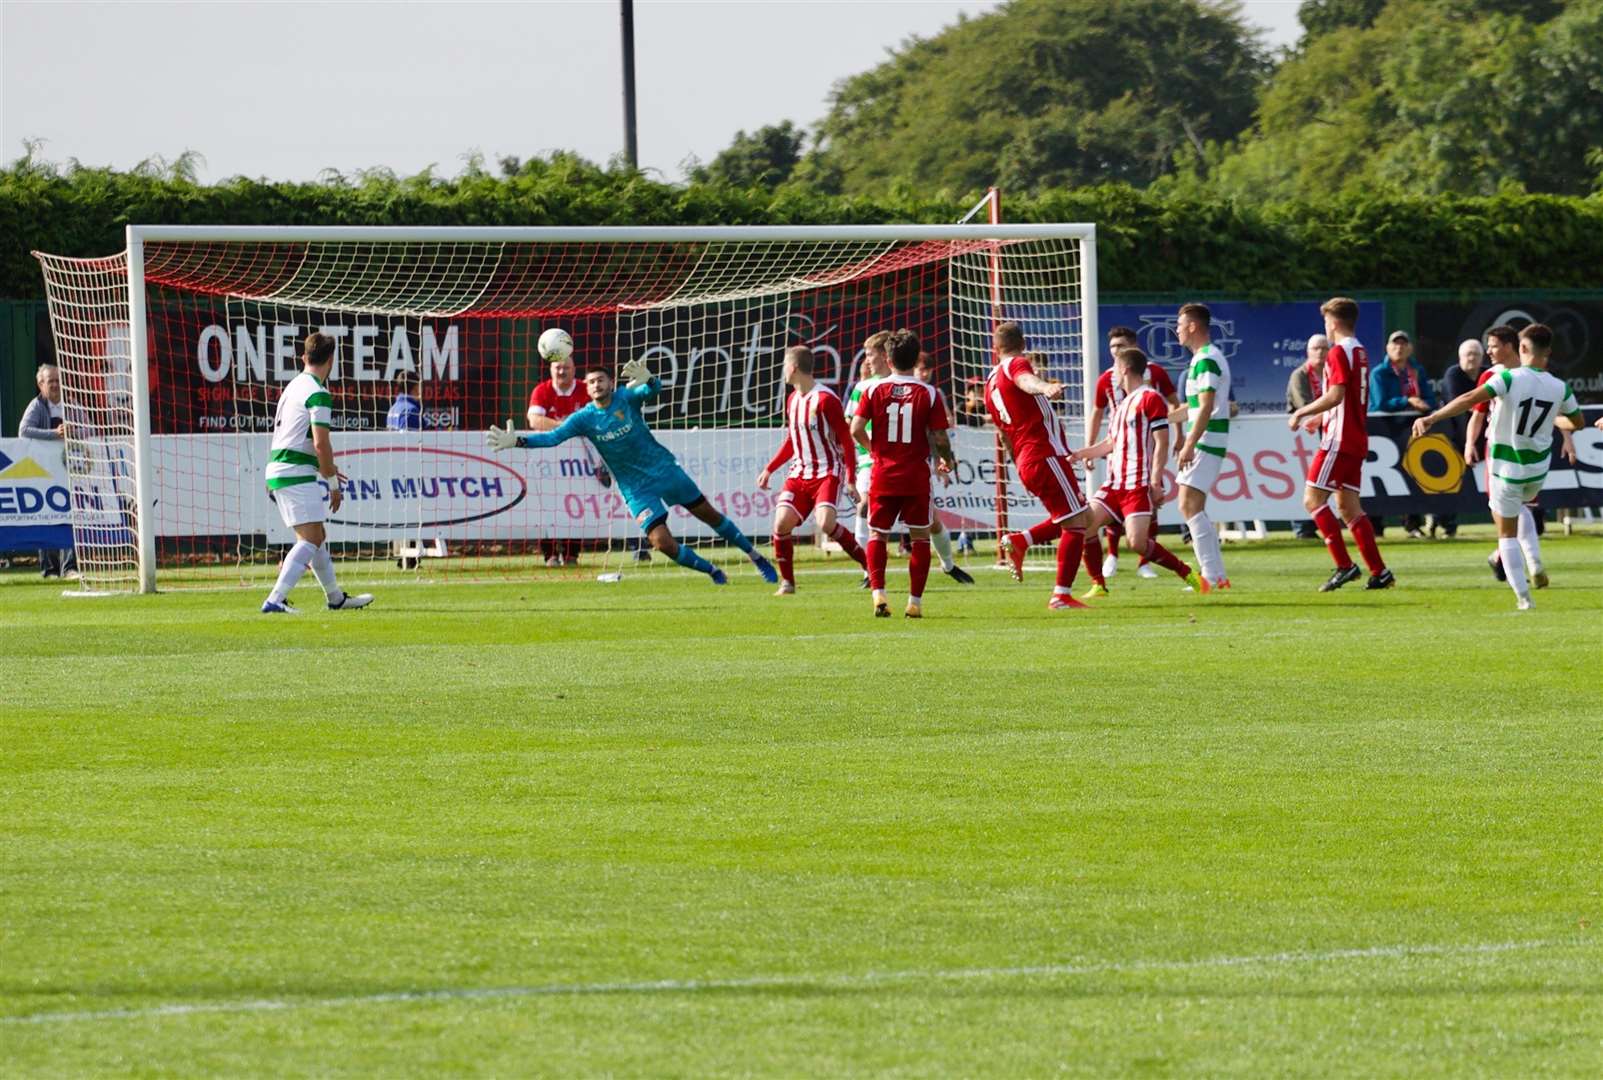 Balint Demus in action in goal for Formartine United against Buckie Thistle this season. Picture: Phil Harman